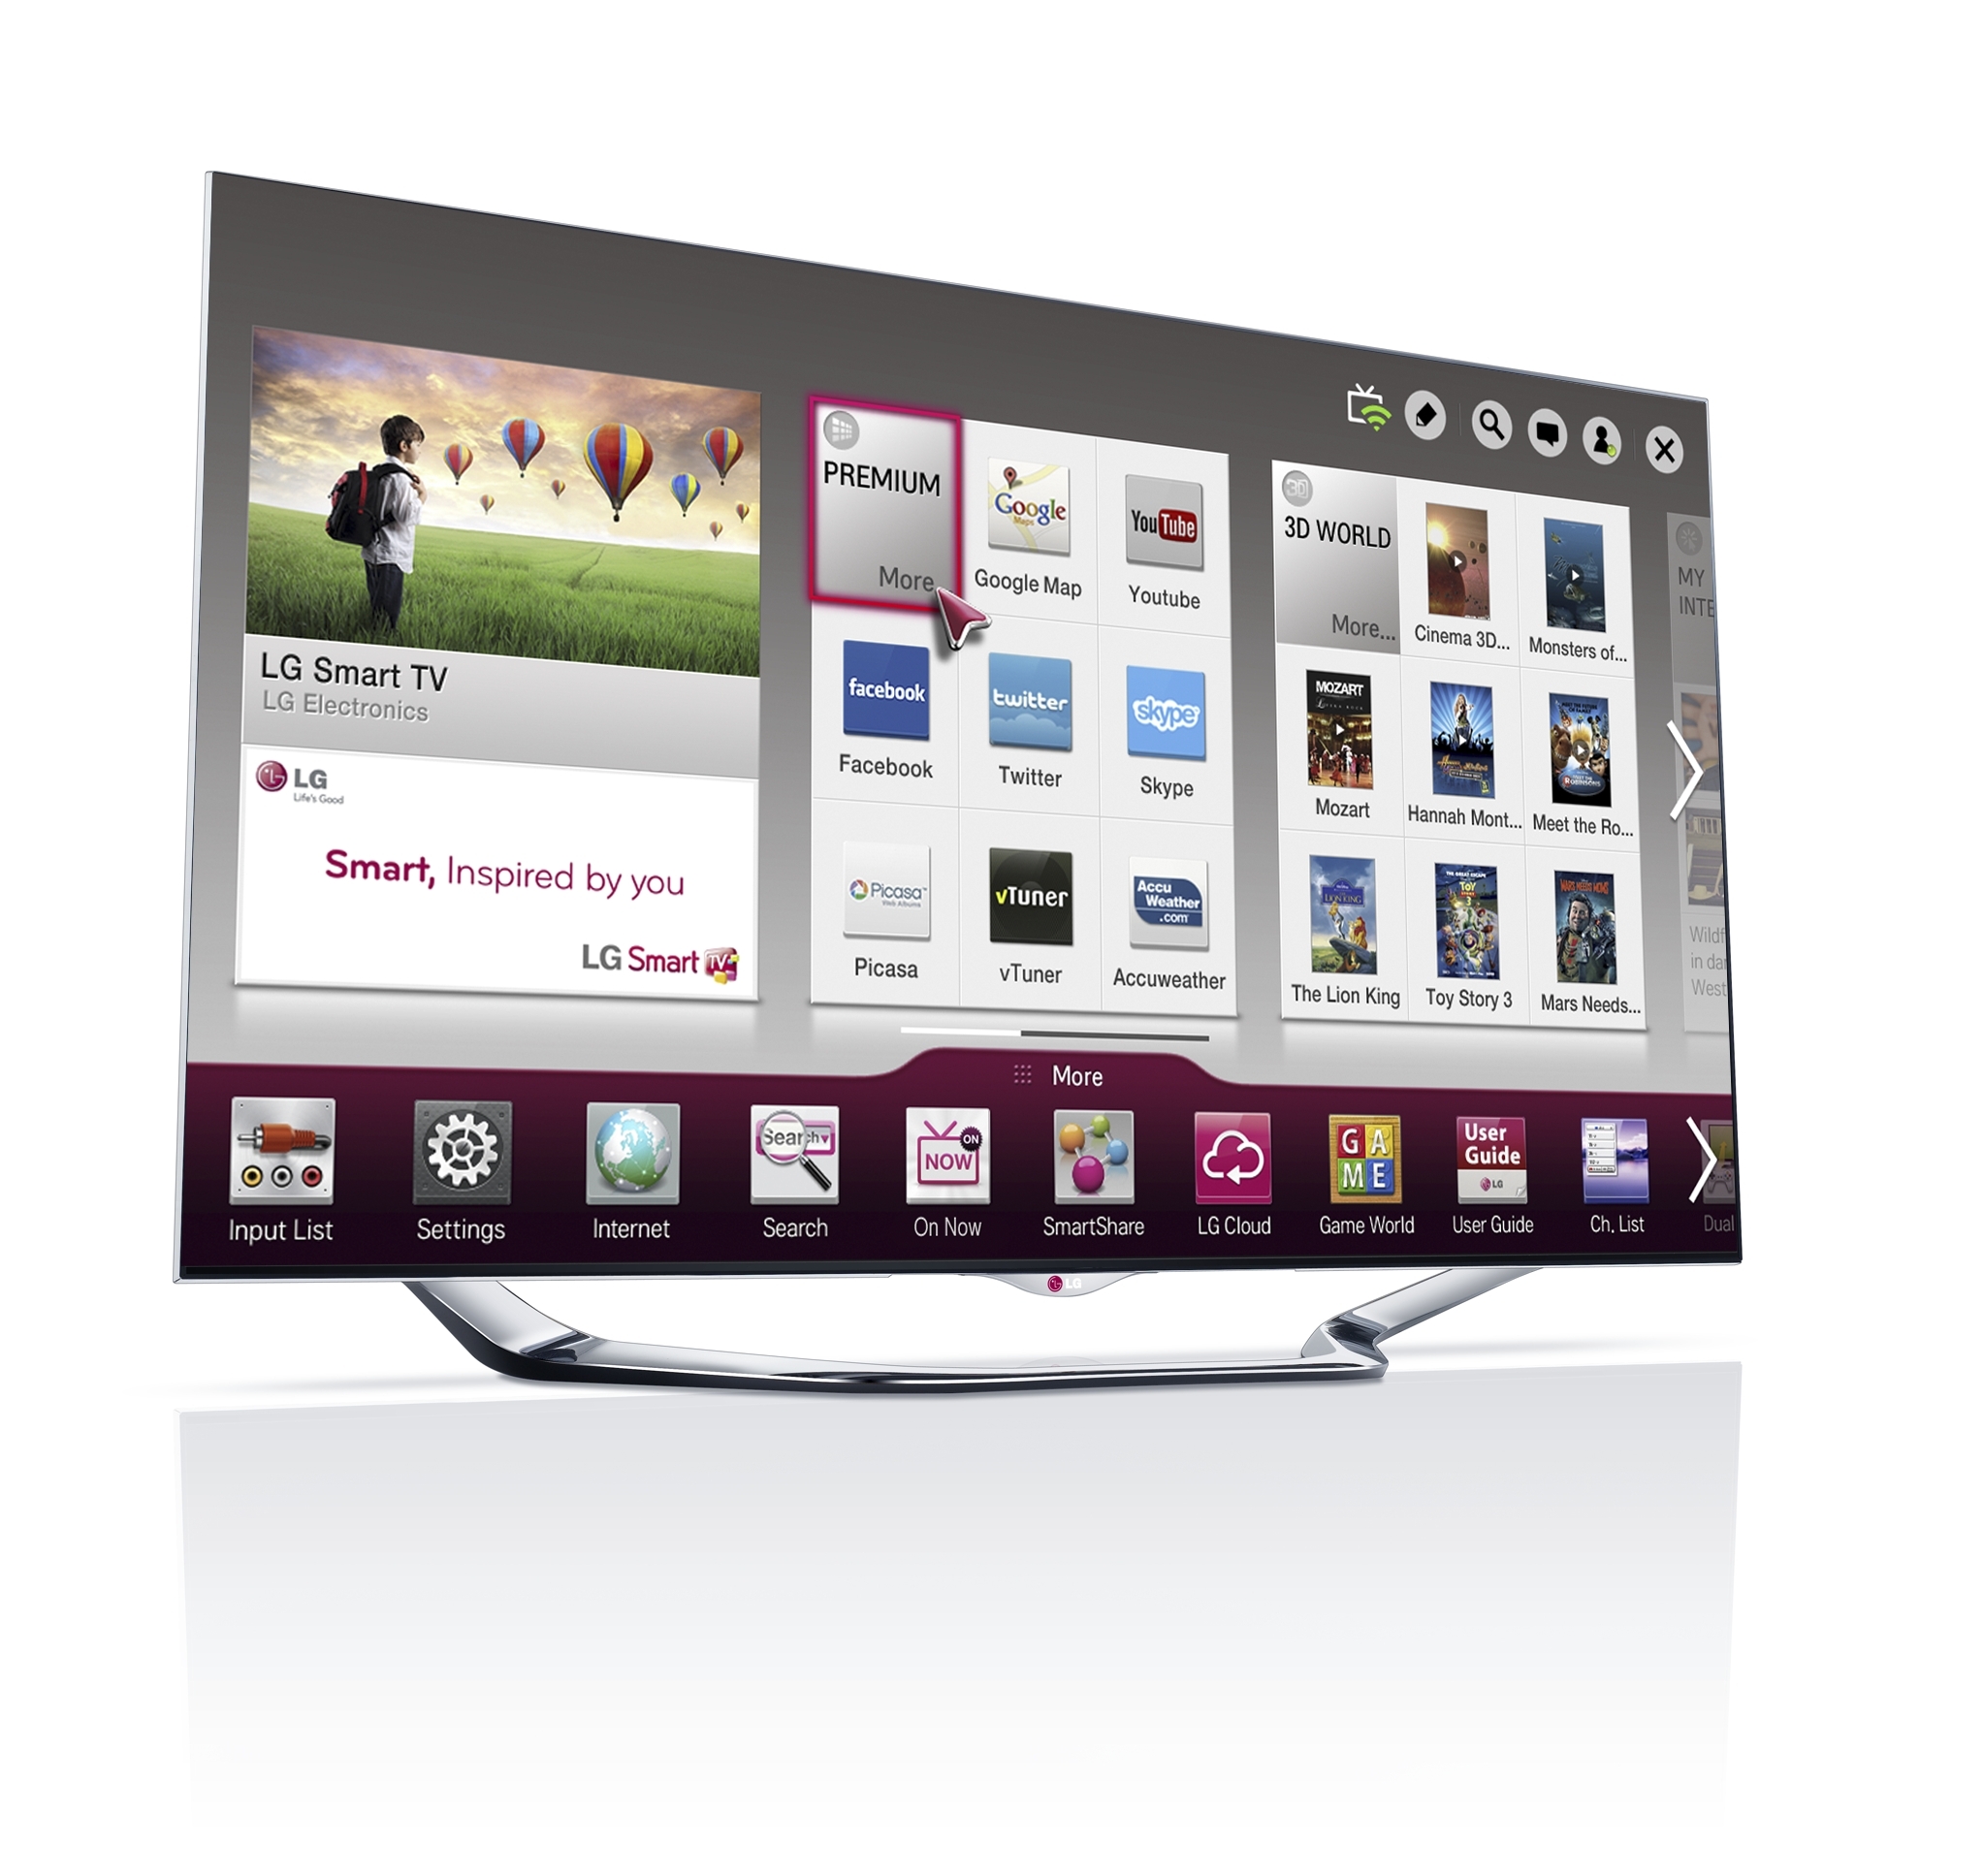 Gambar LG UNVEILS SMARTER, MORE REFINED SMART TV LINEUP AT CES 2013 | LG Newsroom